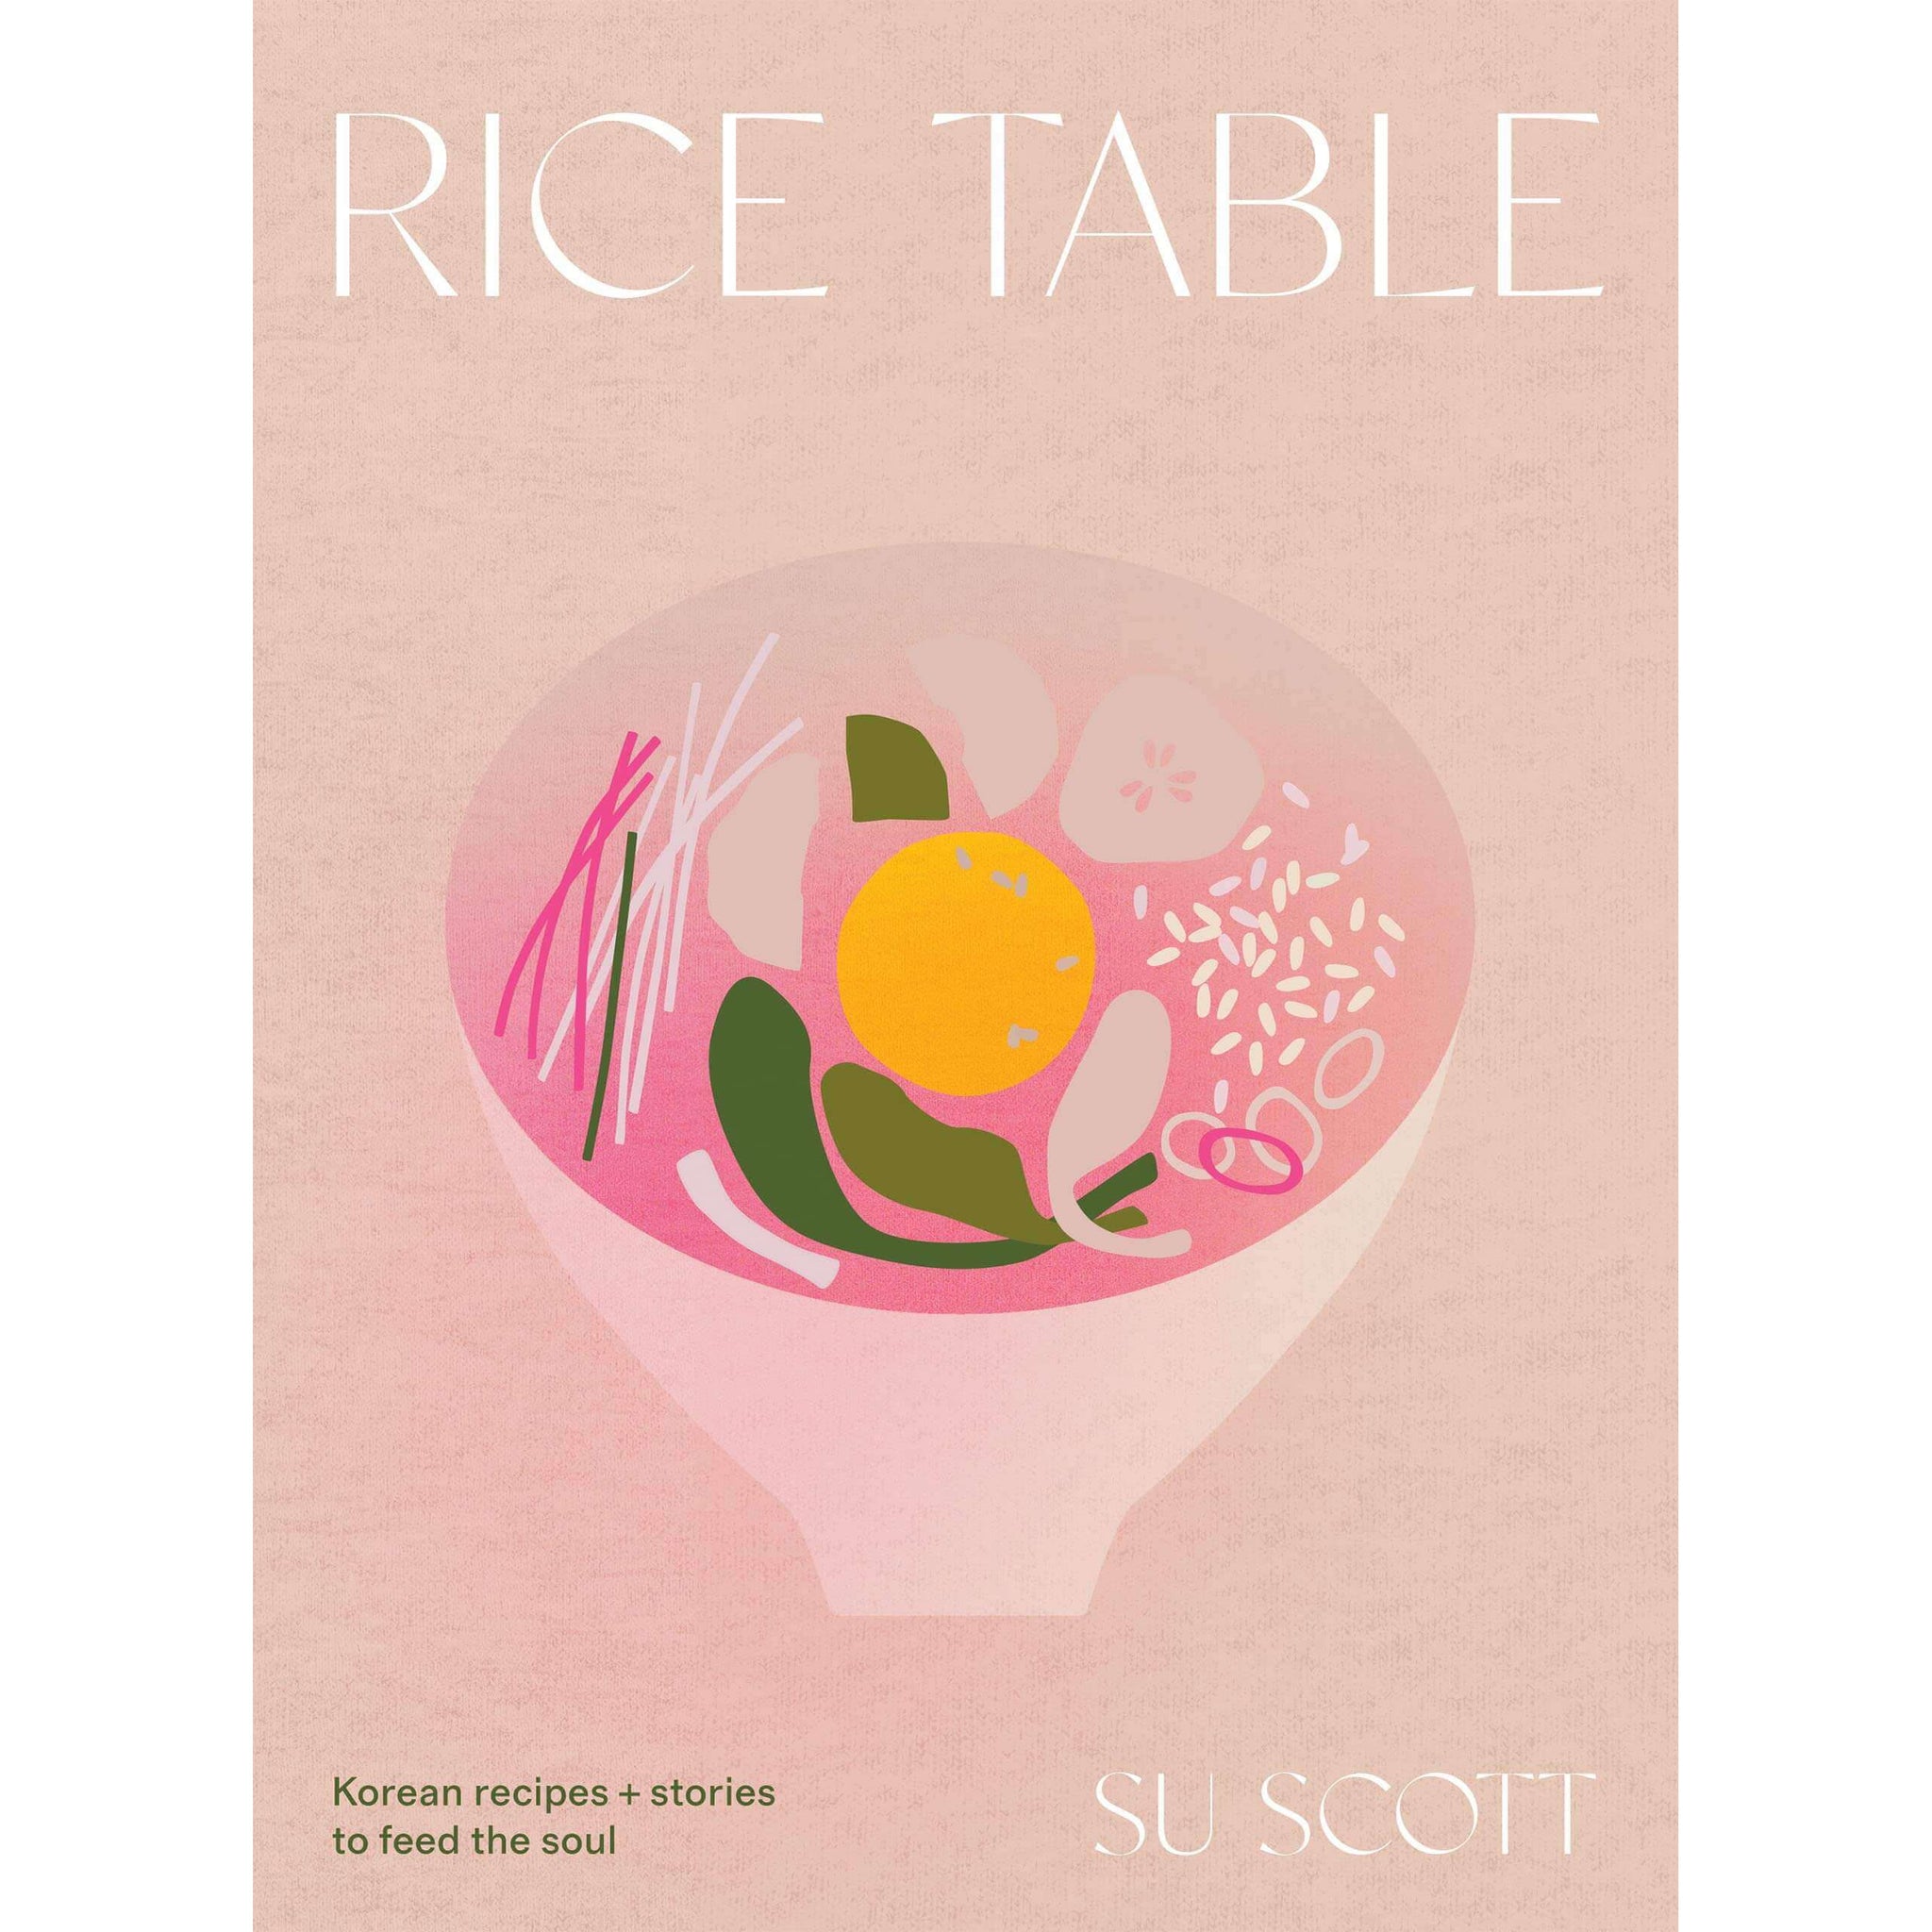 Su Scott Rice Table: Korean Recipes and Stories to Feed the Soul